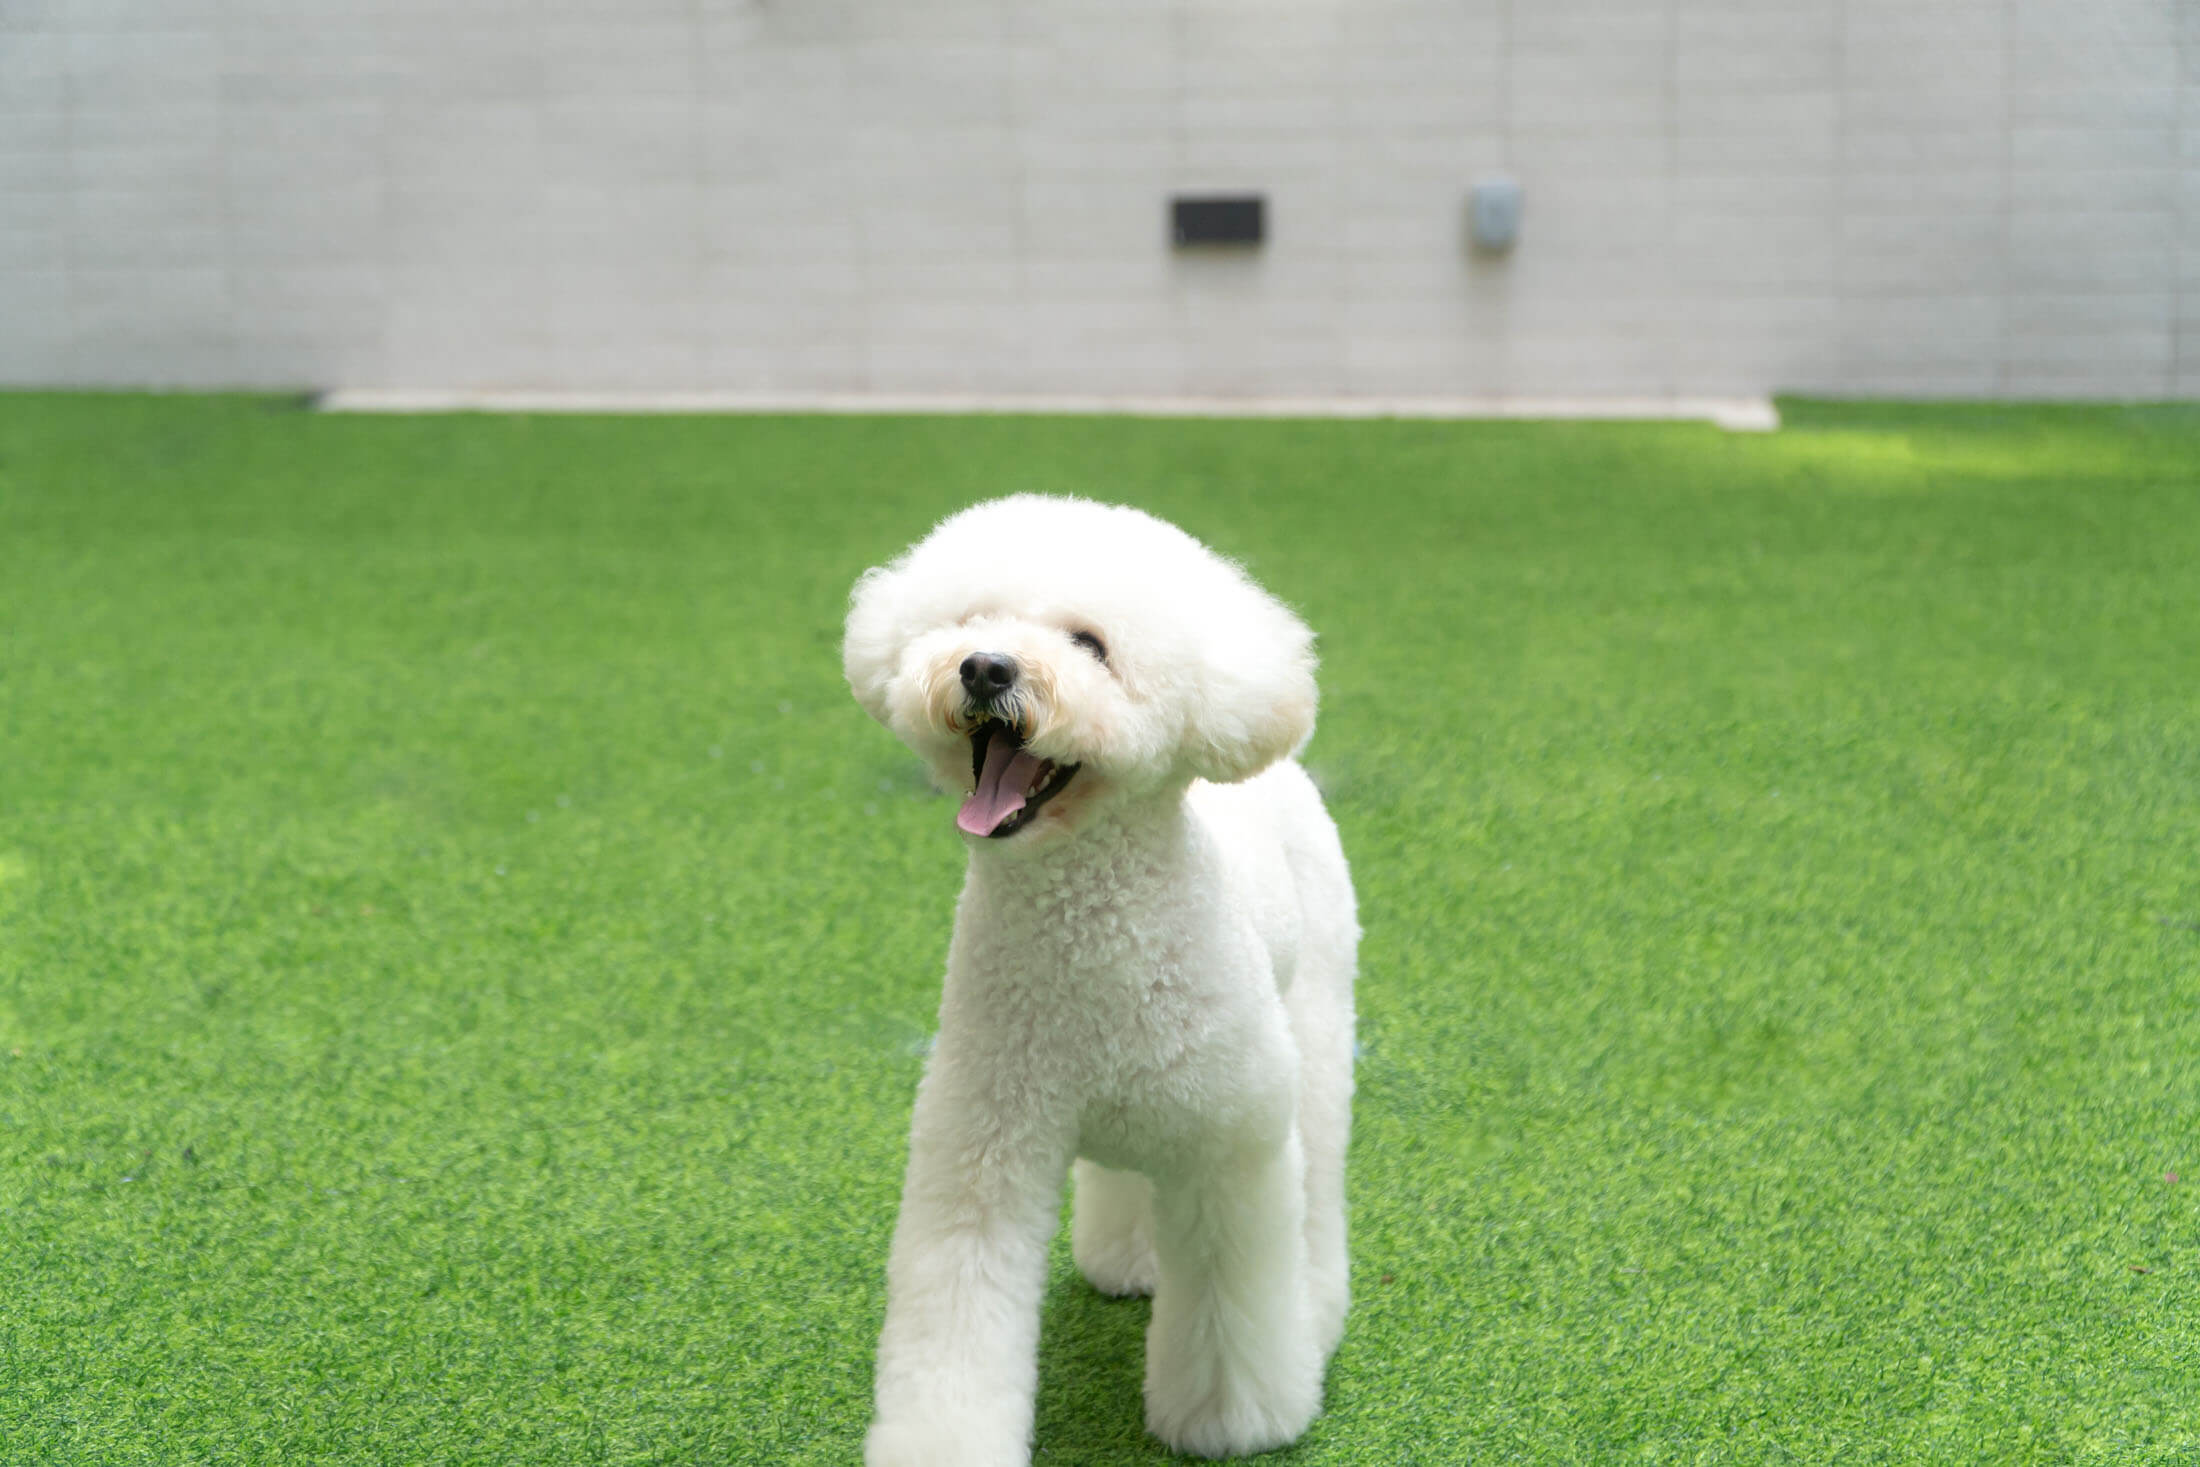 Clean fluffy dog on green grass